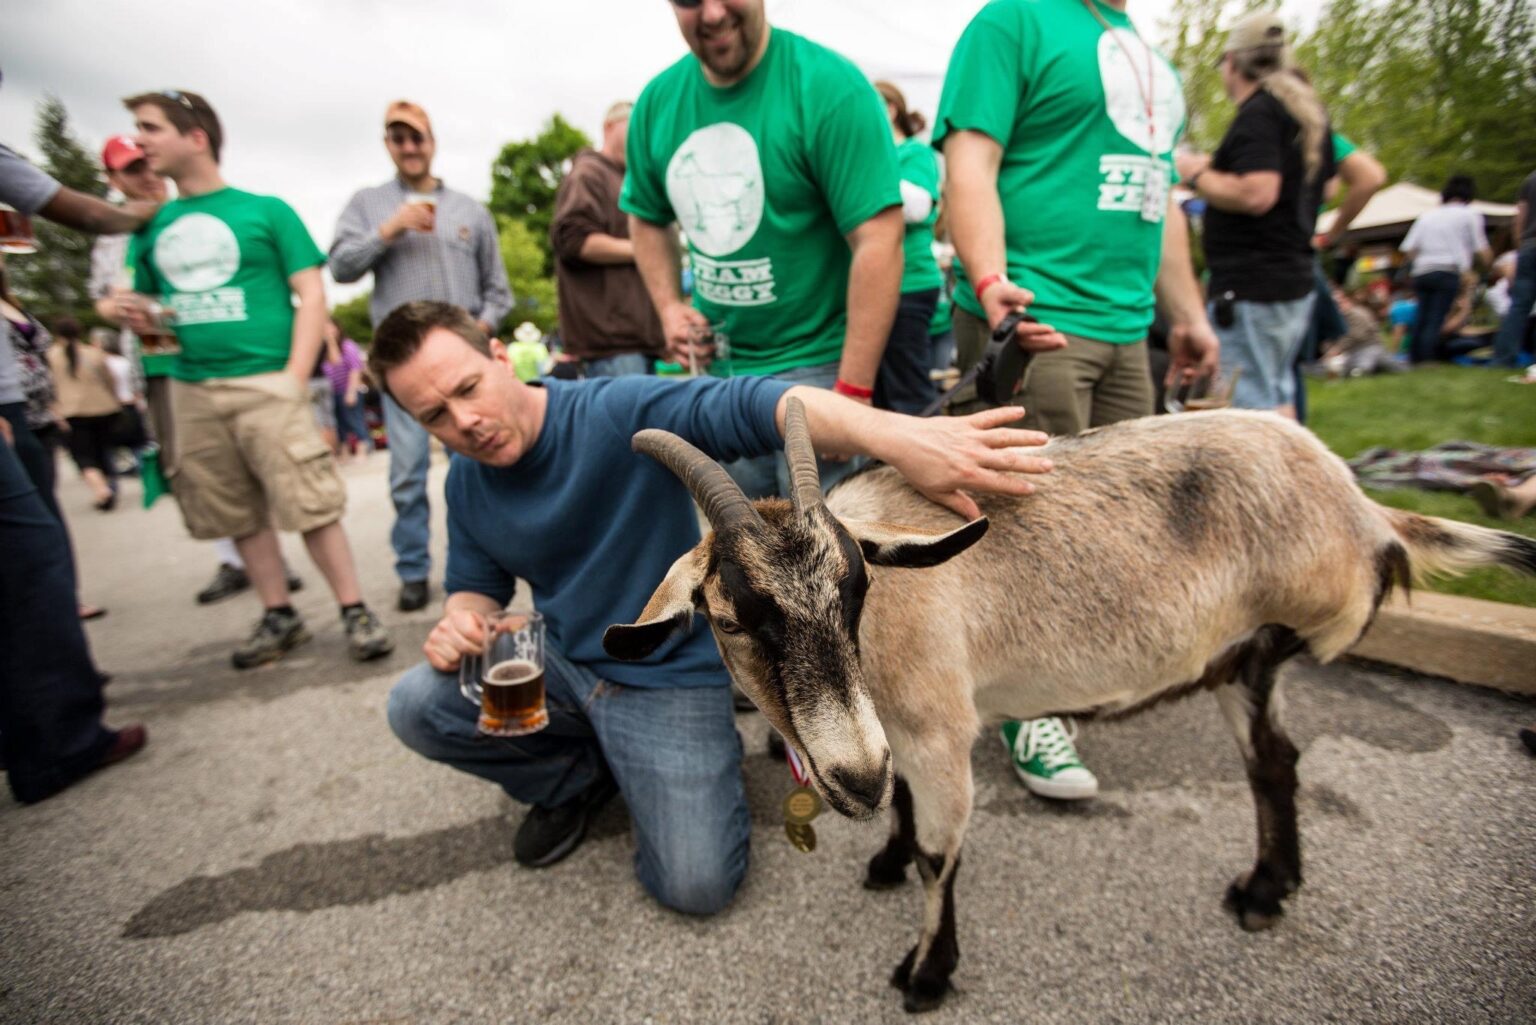 The Fascinating History Behind Sly Fox’s Bock Fest and Goat Race